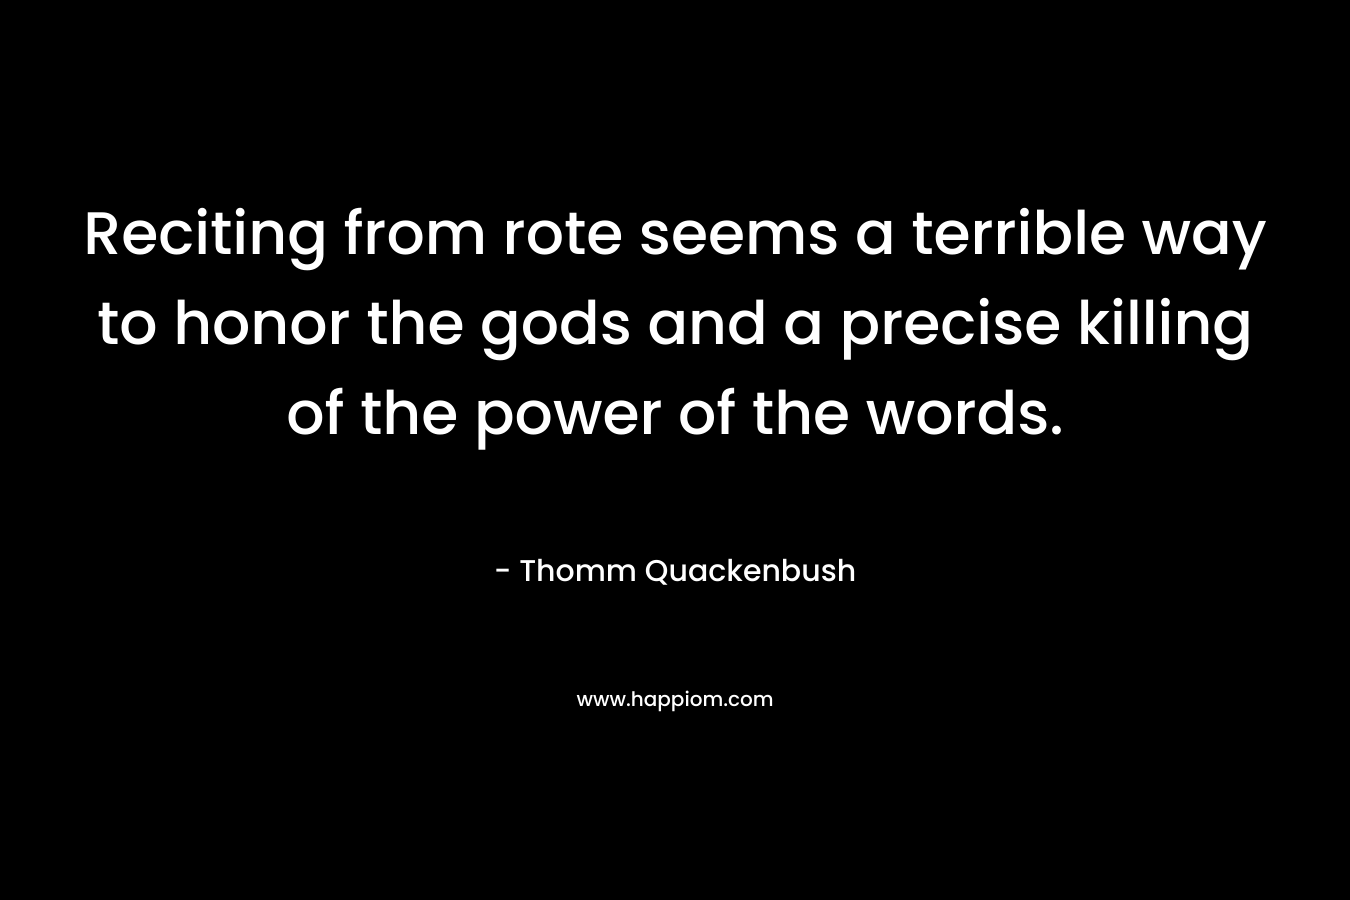 Reciting from rote seems a terrible way to honor the gods and a precise killing of the power of the words. – Thomm Quackenbush